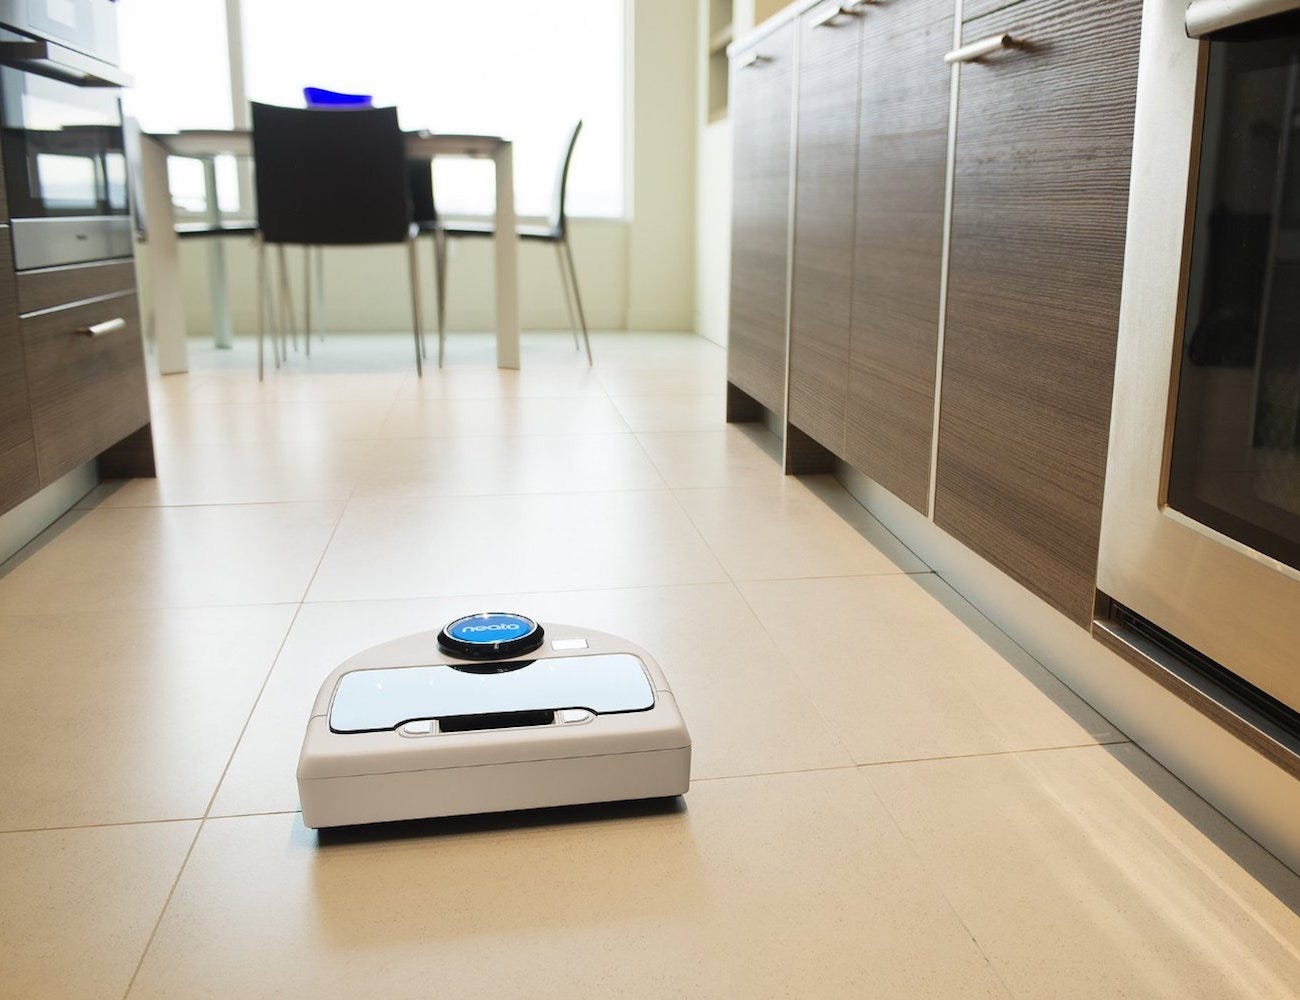 8 Robotic Vacuum Cleaners That Make Home Cleaning Easy